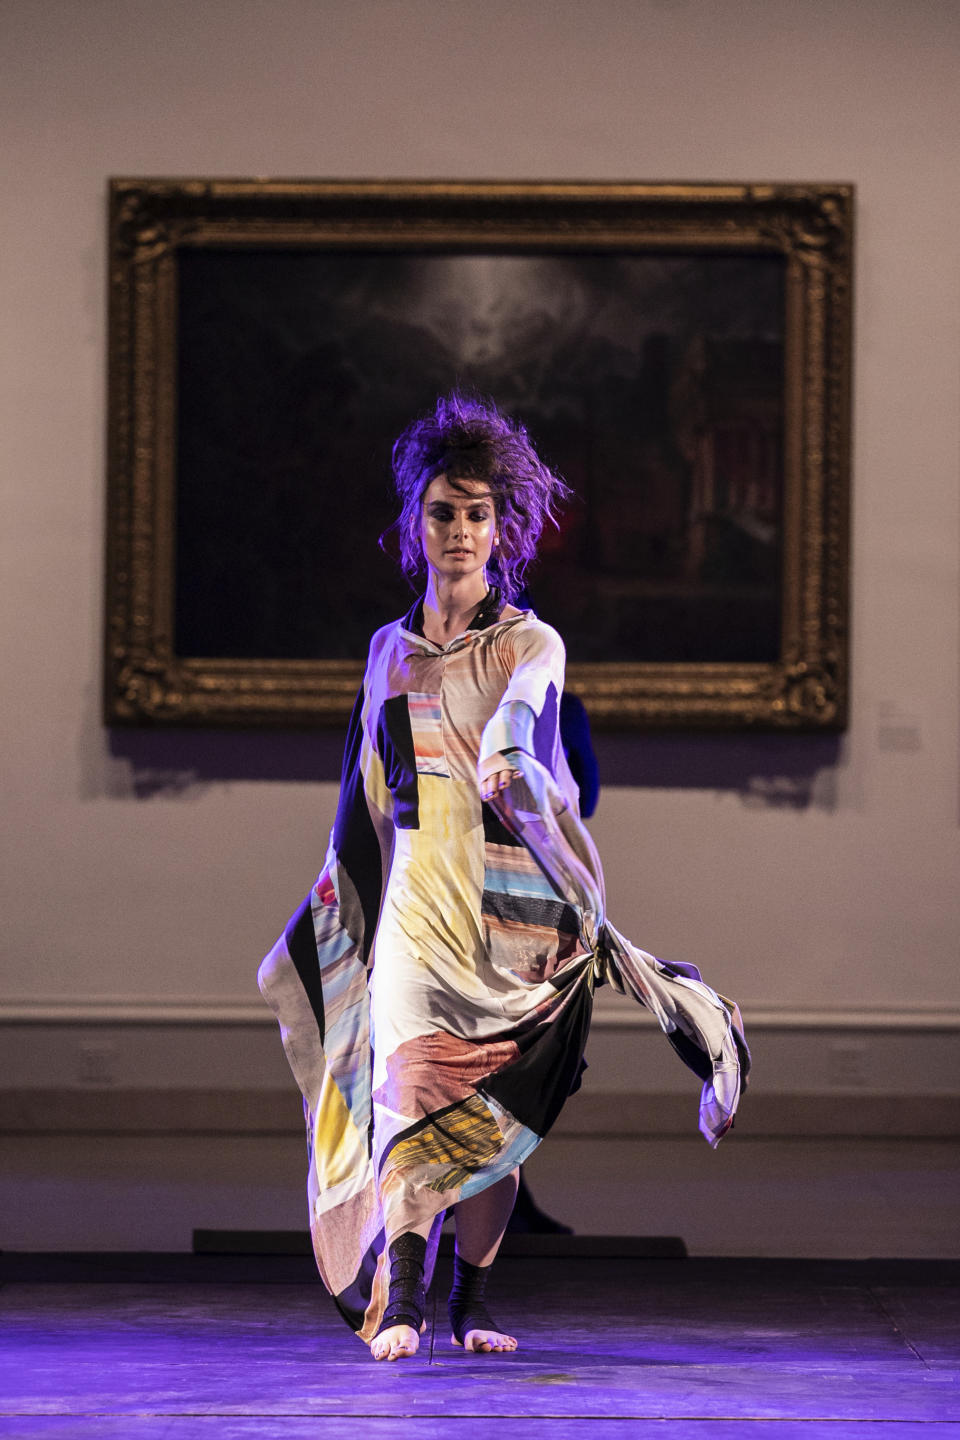 The Cilium collection is modeled during the dapperQ fashion show at the Brooklyn Museum on Thursday Sept. 5, 2019, in New York. (AP Photo/Jeenah Moon)